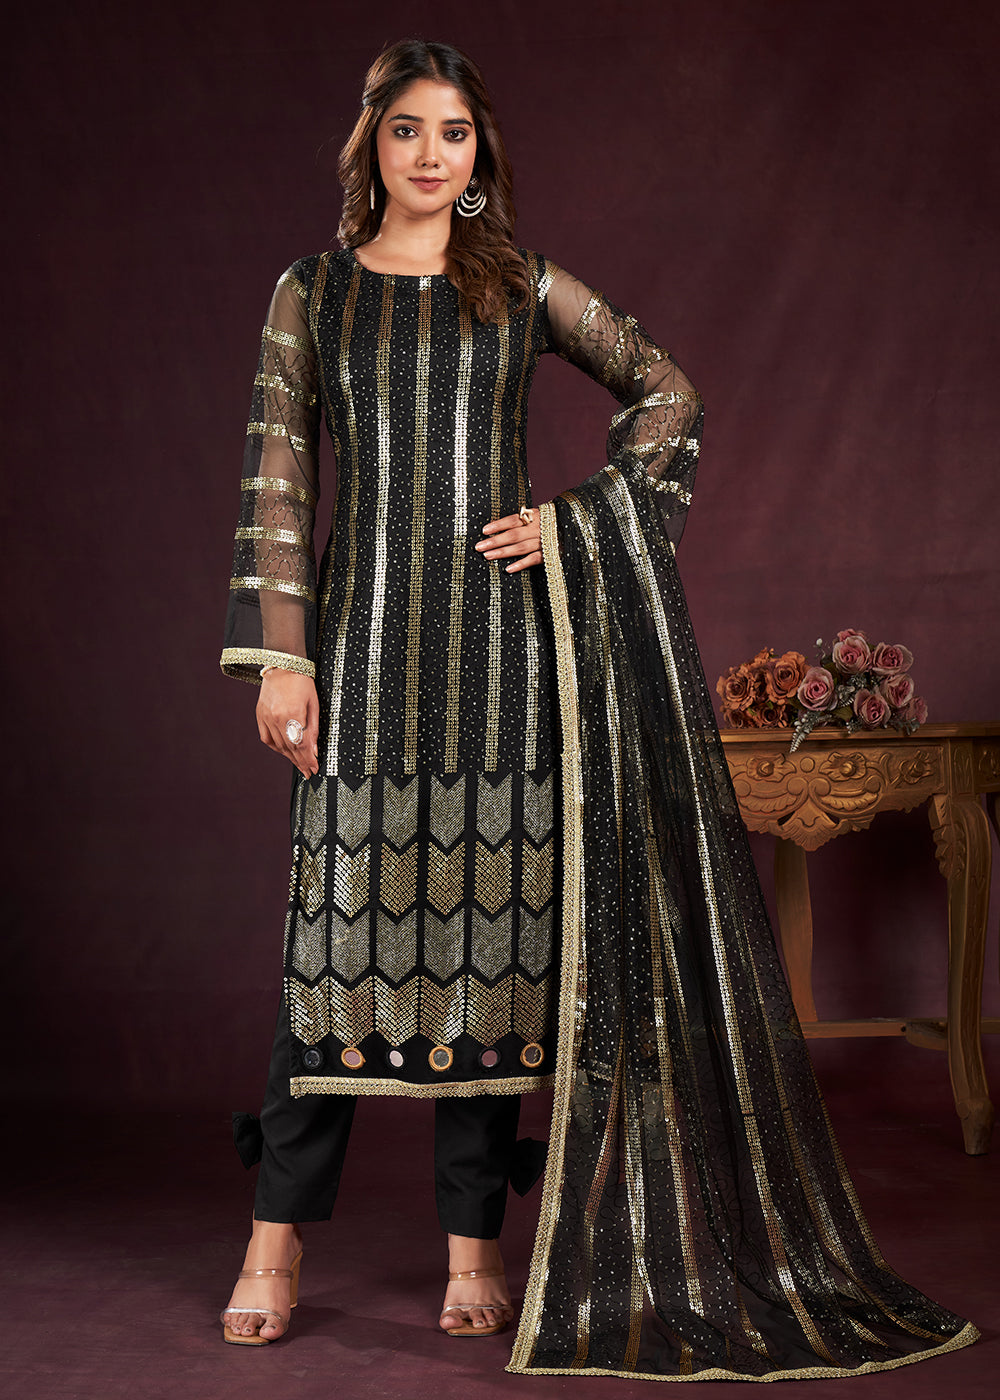 Buy Now Black Butterfly Net Embroidered Festive Salwar Suit Online in USA, UK, Canada, Germany, Australia & Worldwide at Empress Clothing. 